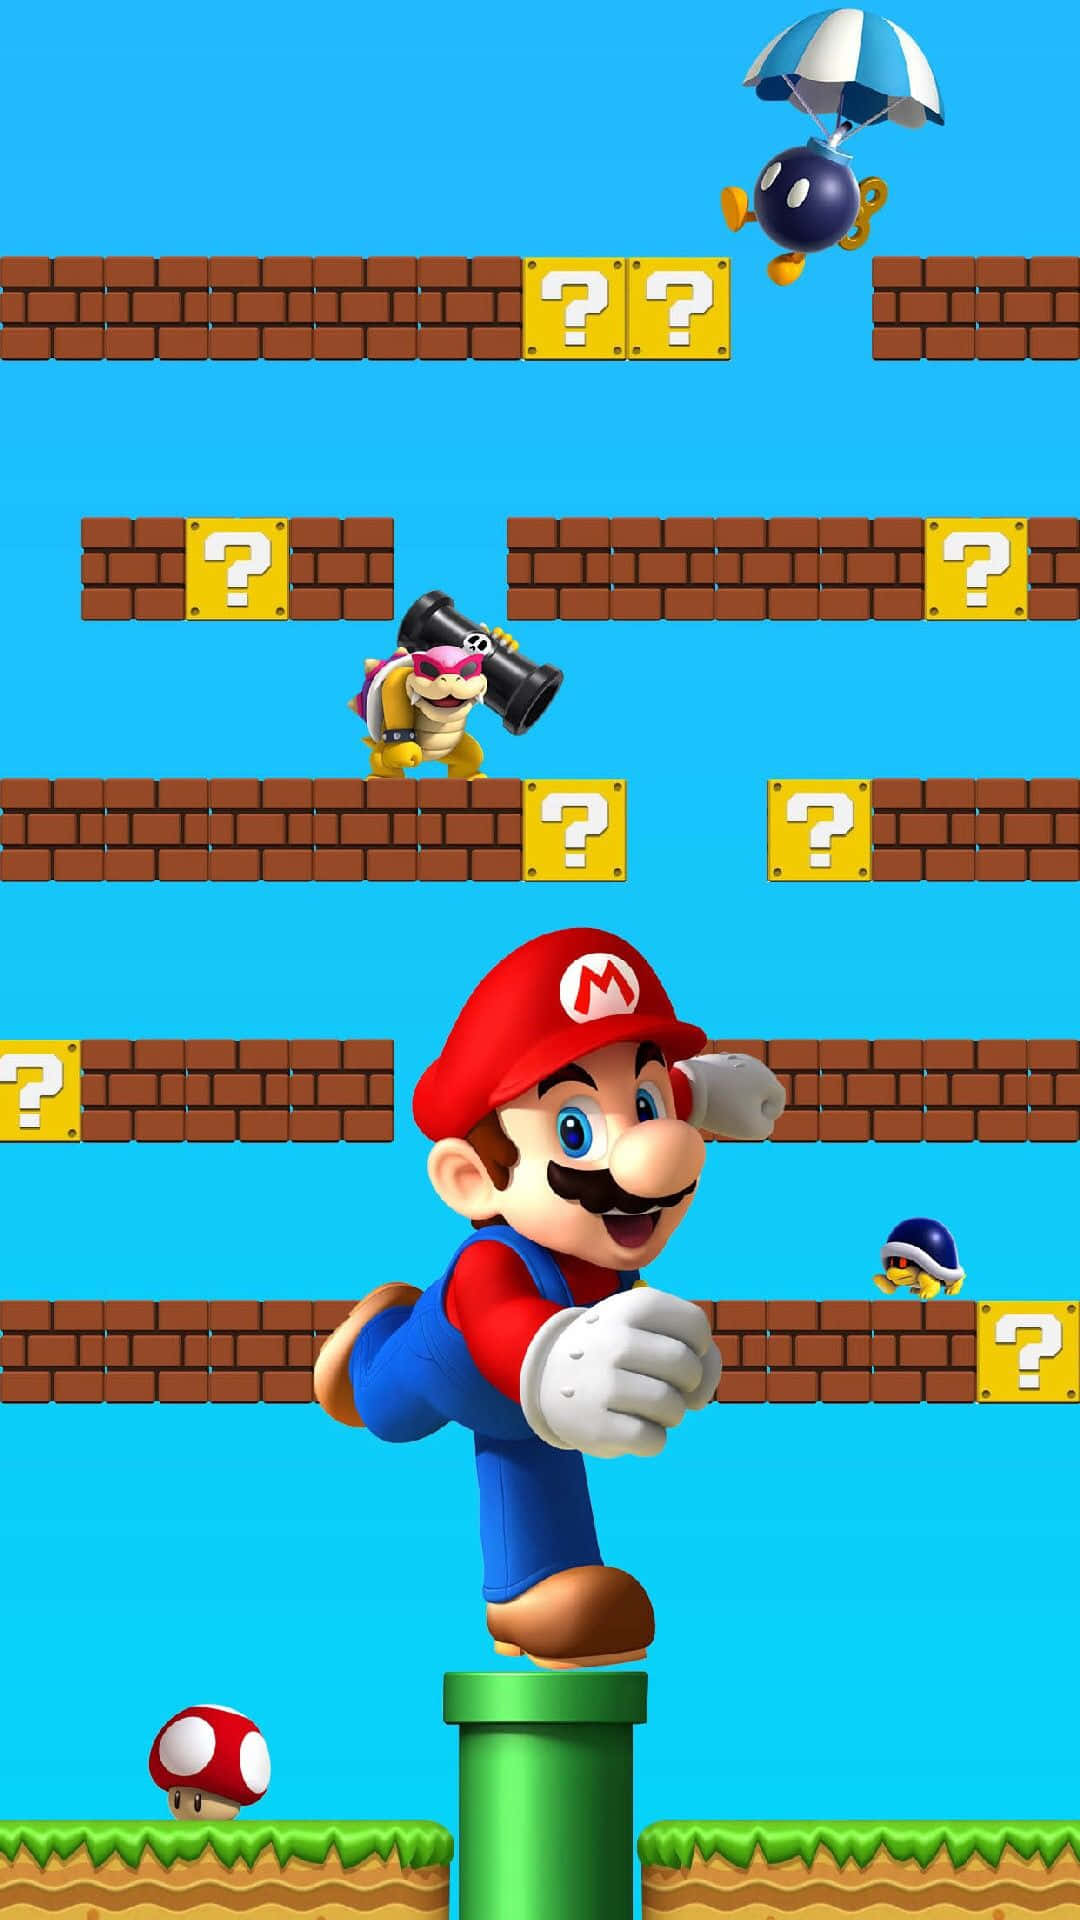 "Level up your entertainment with a Super Mario iPhone!" Wallpaper